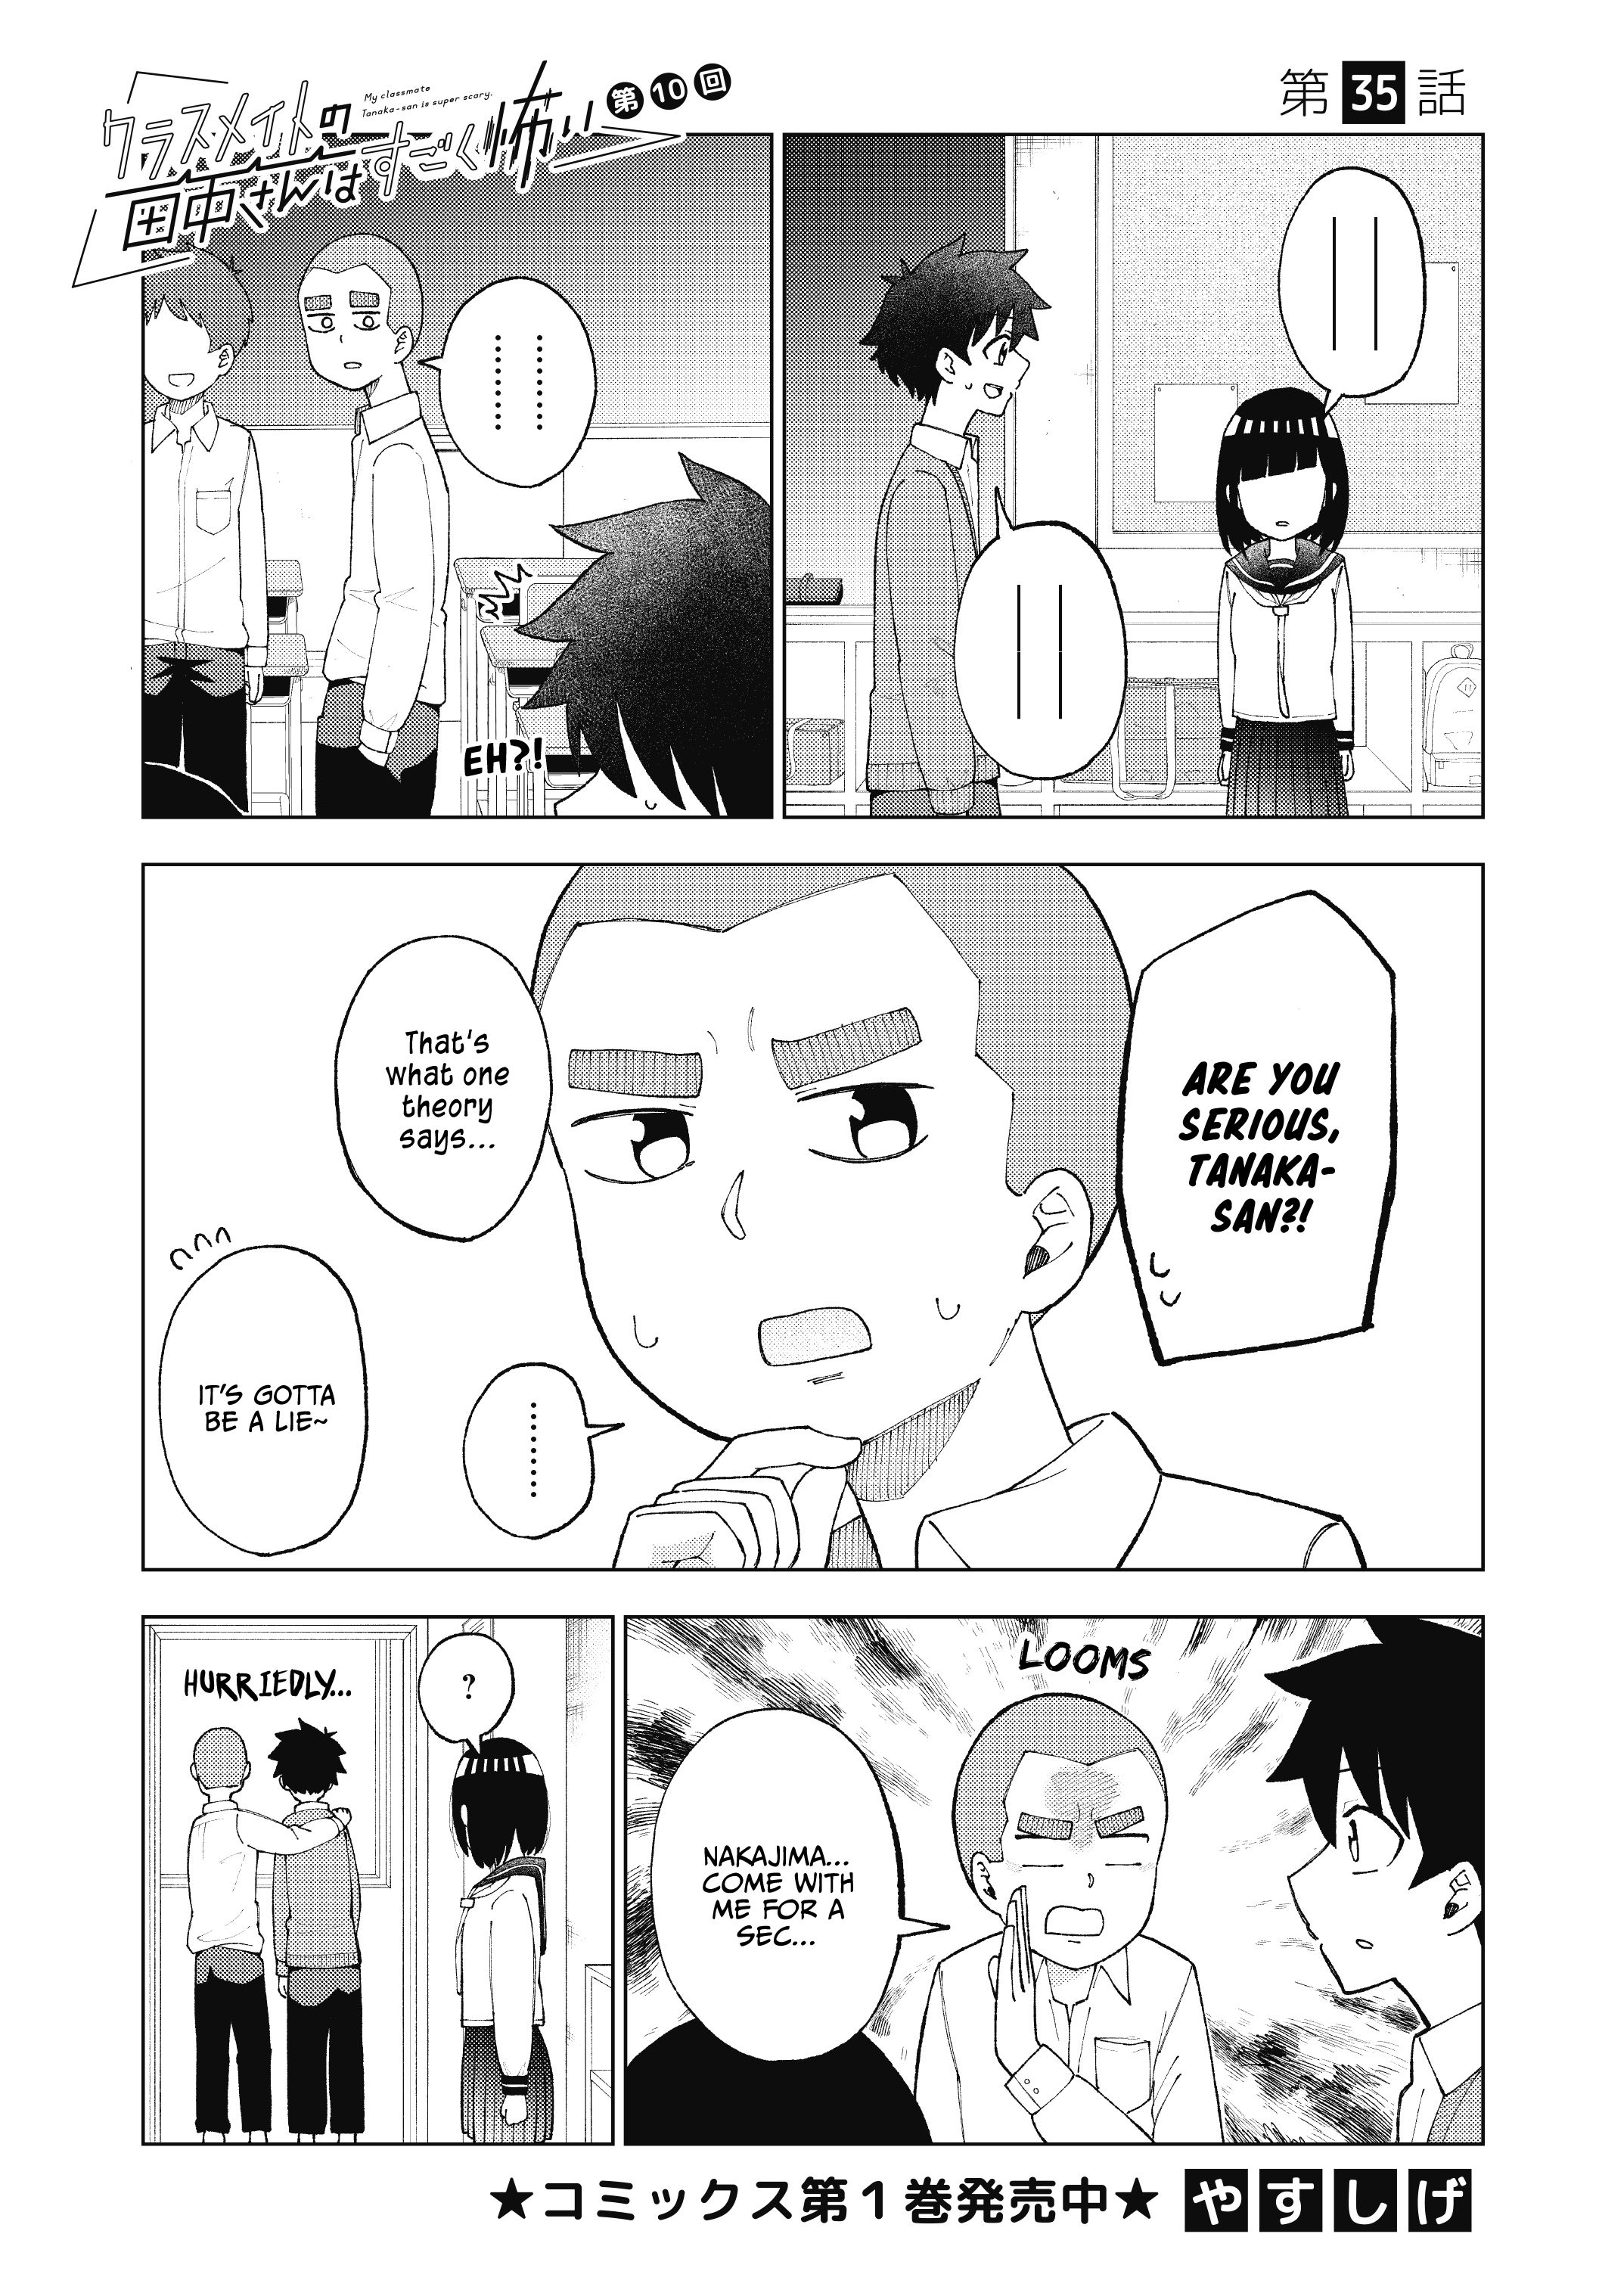 My Classmate Tanaka-san is Super Scary - chapter 35 - #2